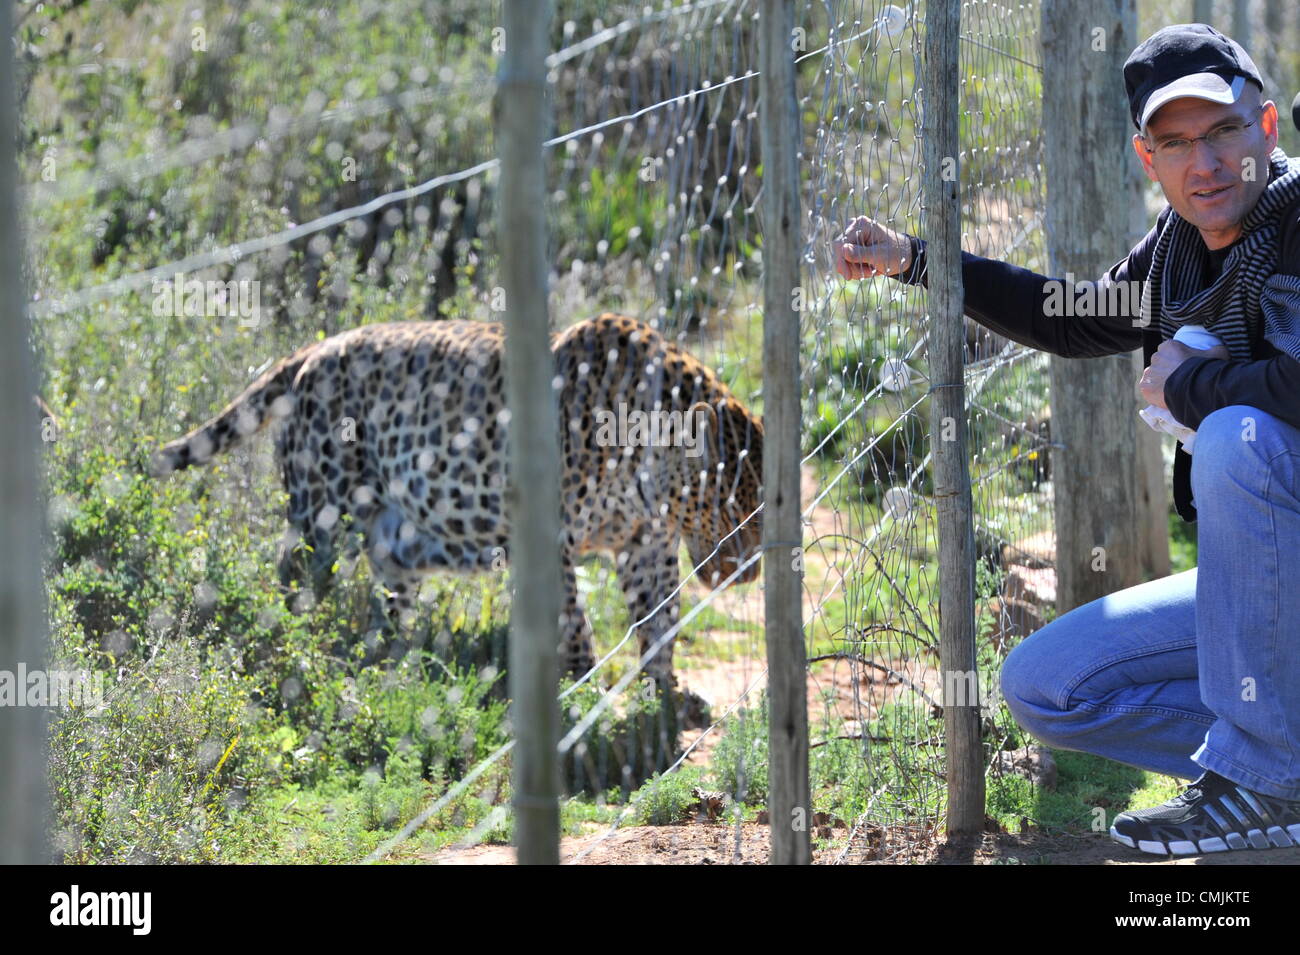 16th Aug 2012. EASTERN CAPE, SOUTH AFRICA: Alberto Lena and Kuma the  leopard reunite on August 16, 2012 at the Shamwari Game Reserve in Eastern  Cape, South Africa thirteen years after Lena